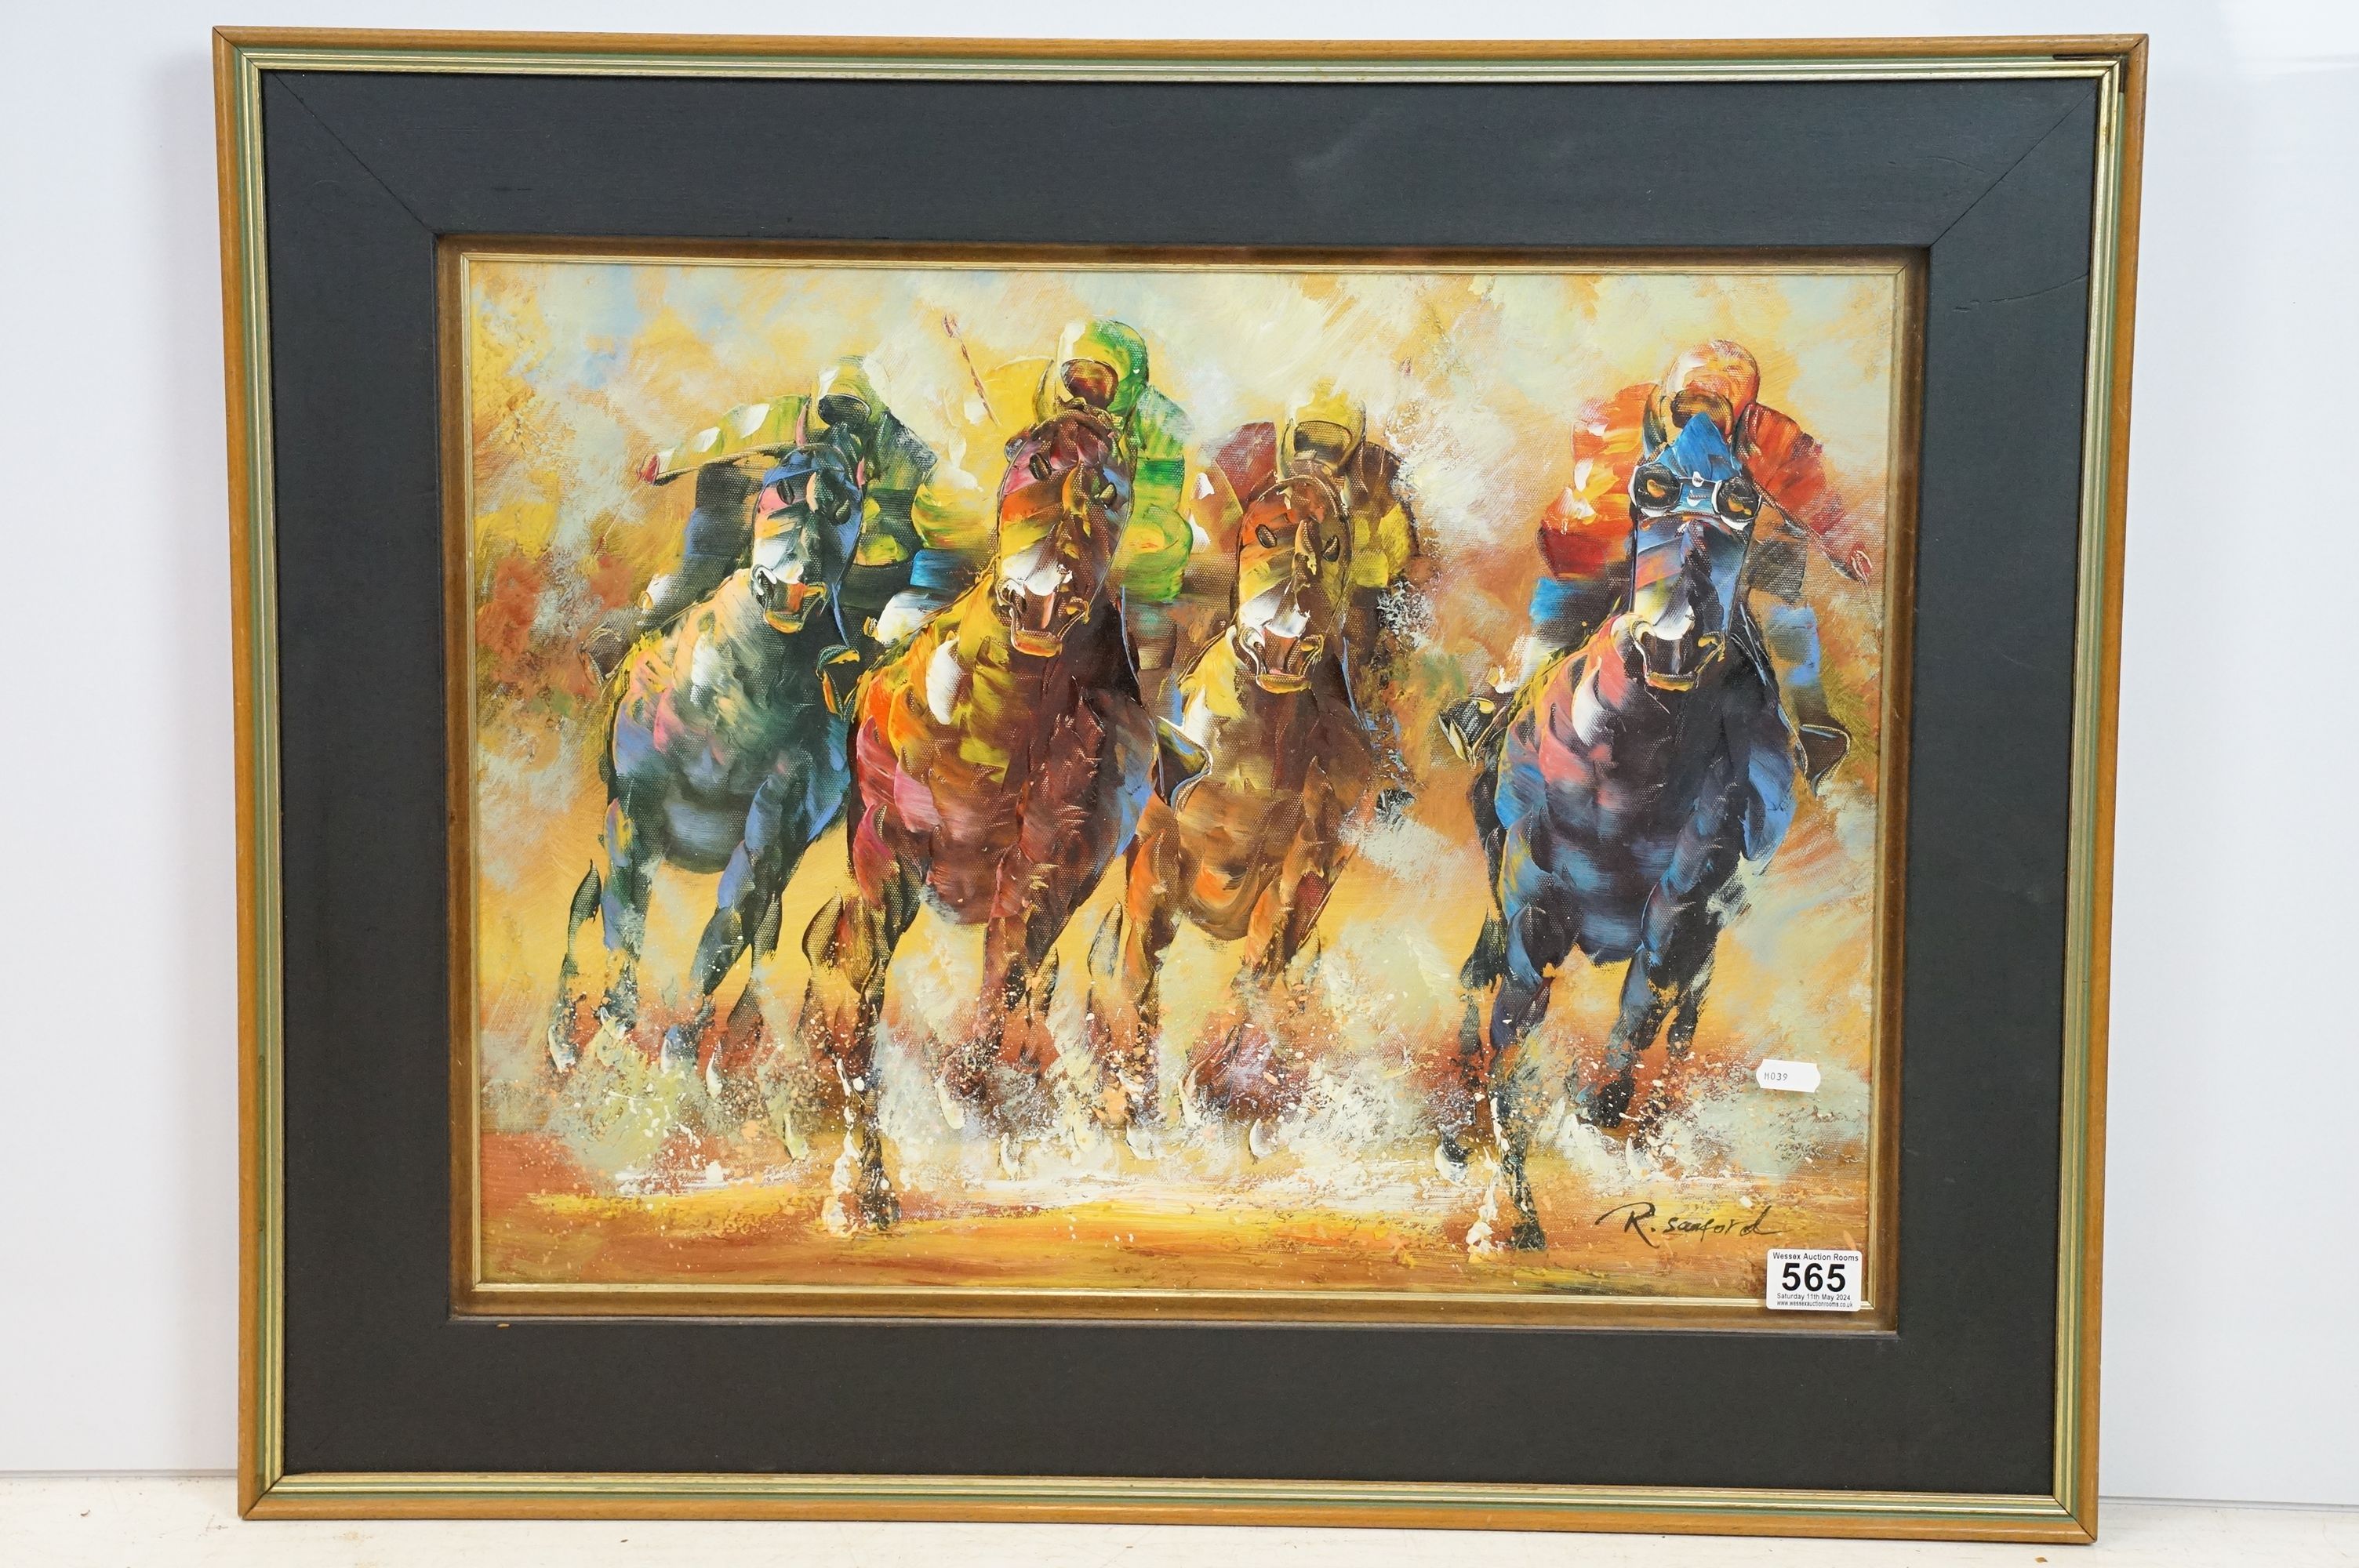 R Sanford, racehorses, oil on board, signed lower right, 42 x 57cm, framed and glazed